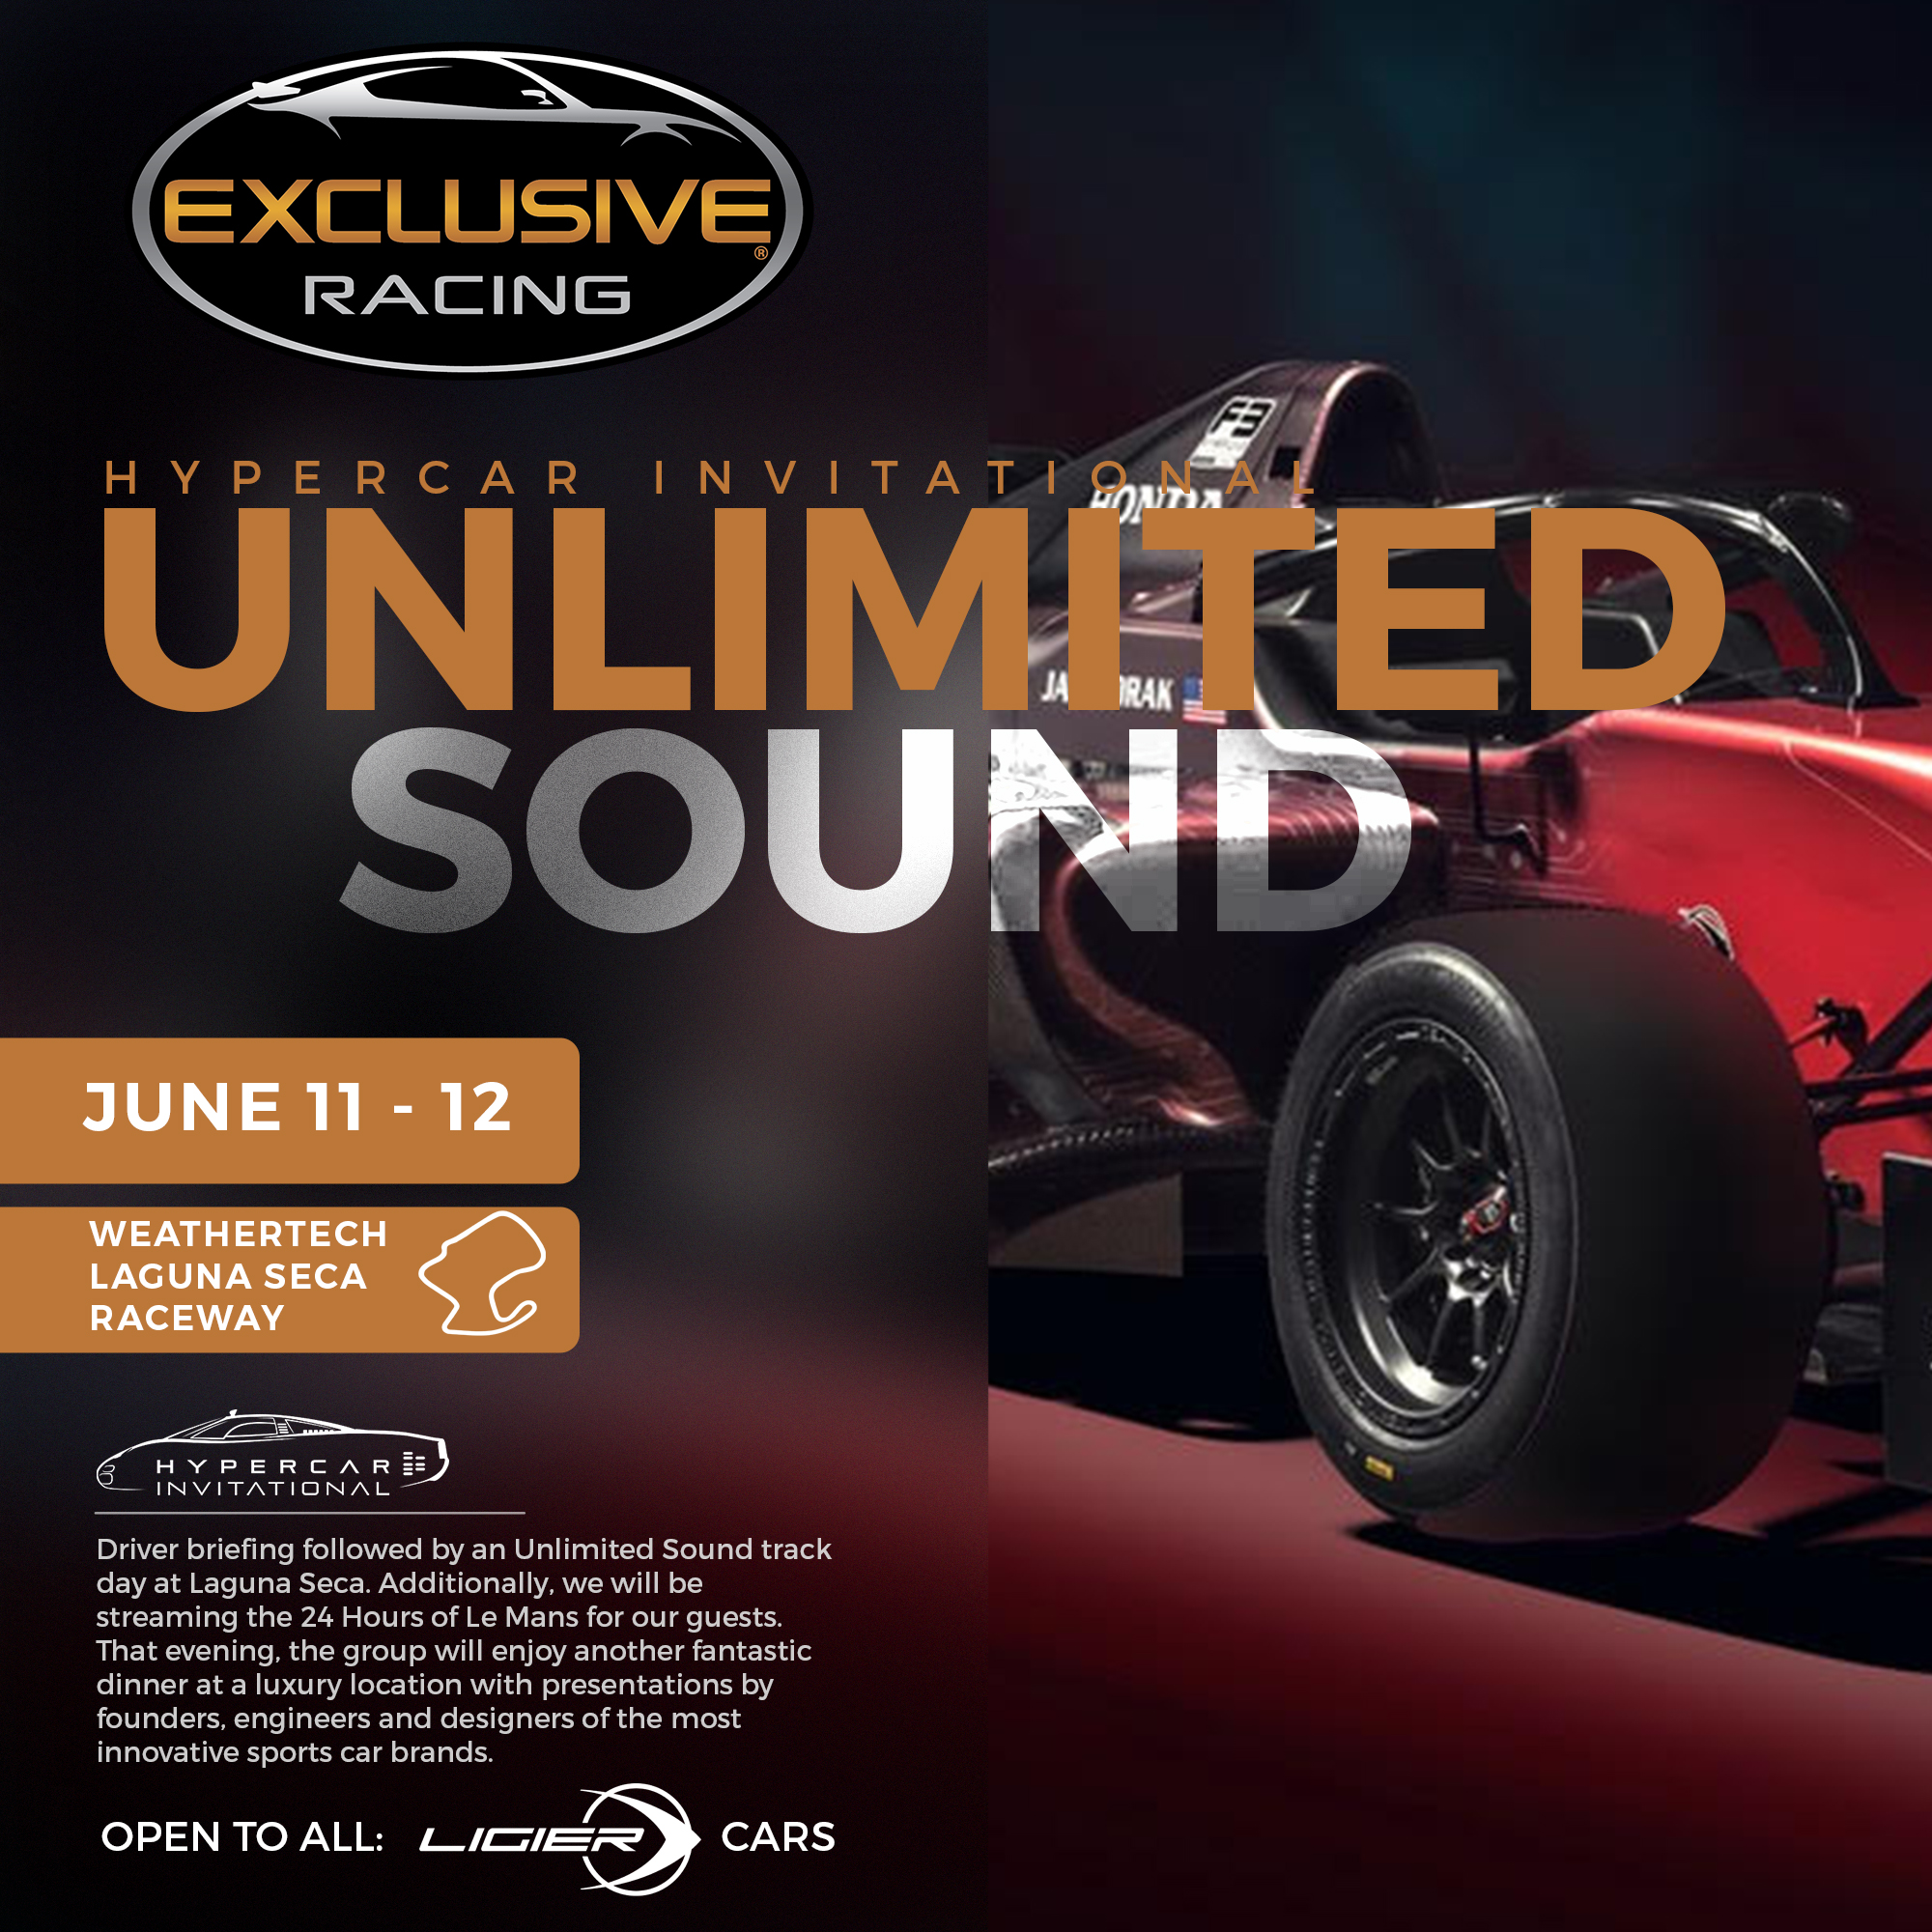 HyperCar Invitation Unlimited Sound Poster